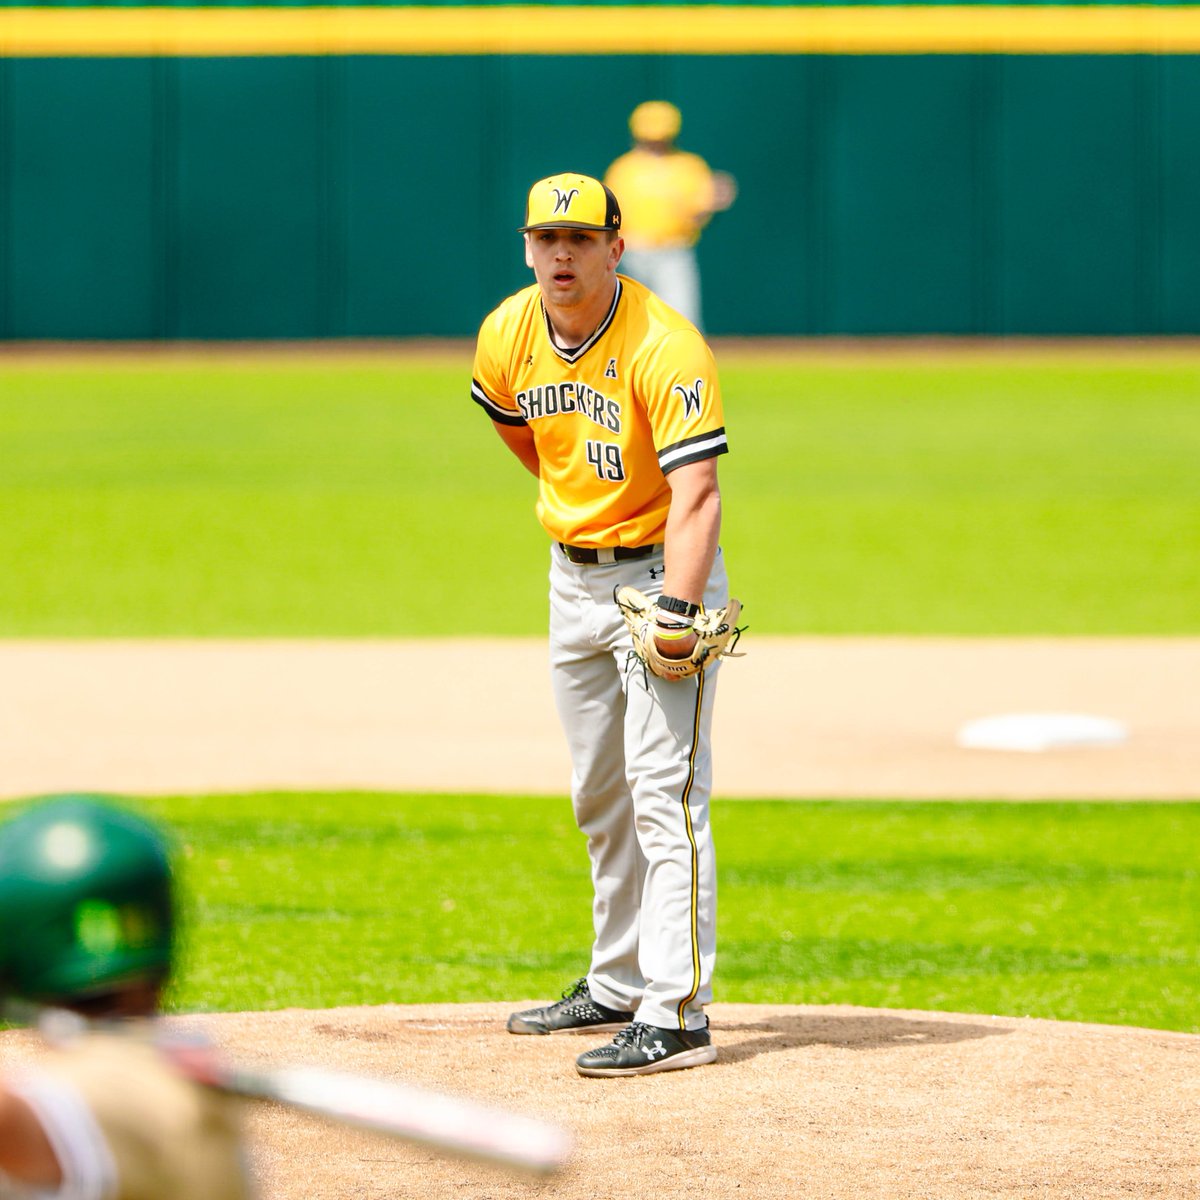 Tommy's day is done, a season-high 9 strikeouts and in line for the win 🤝 E6 | 🌾4, 🐉 1